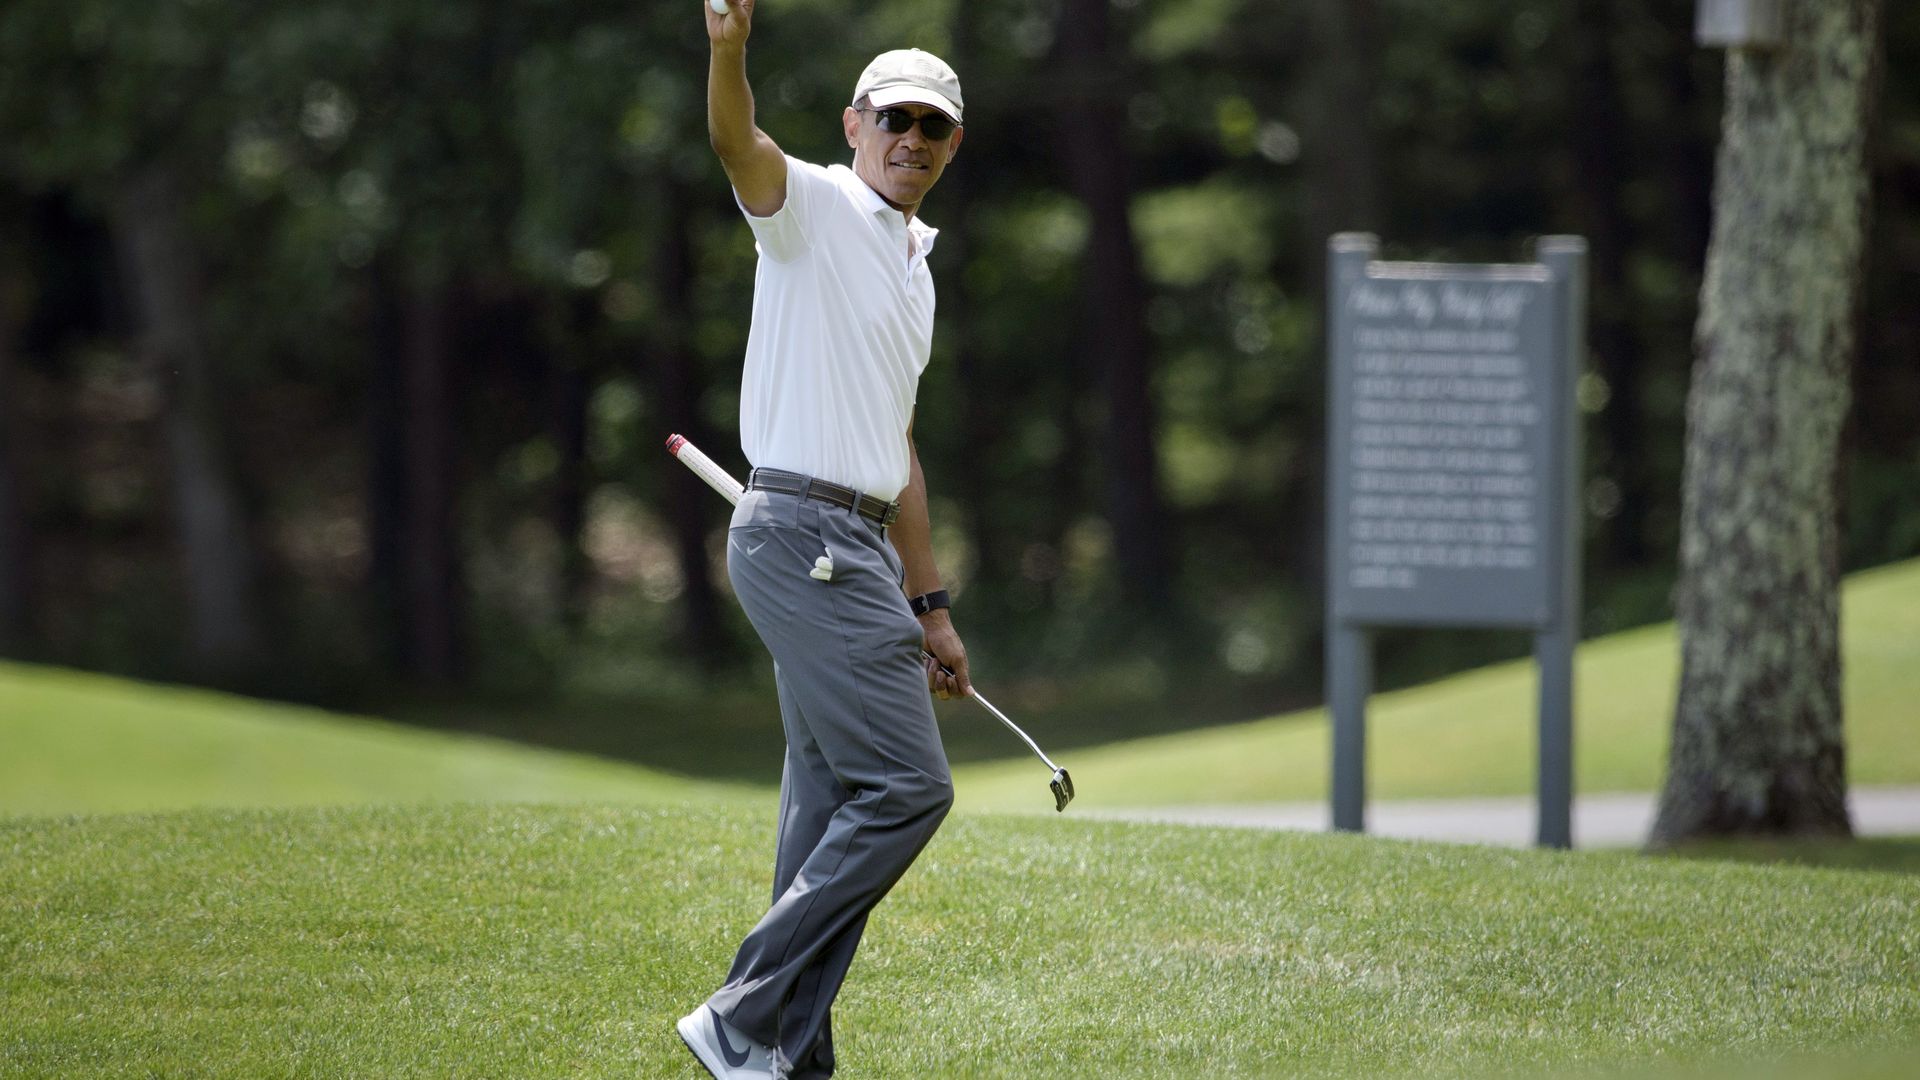 President Obama is seen waving while playing golf on Martha's Vineyard in 2015.